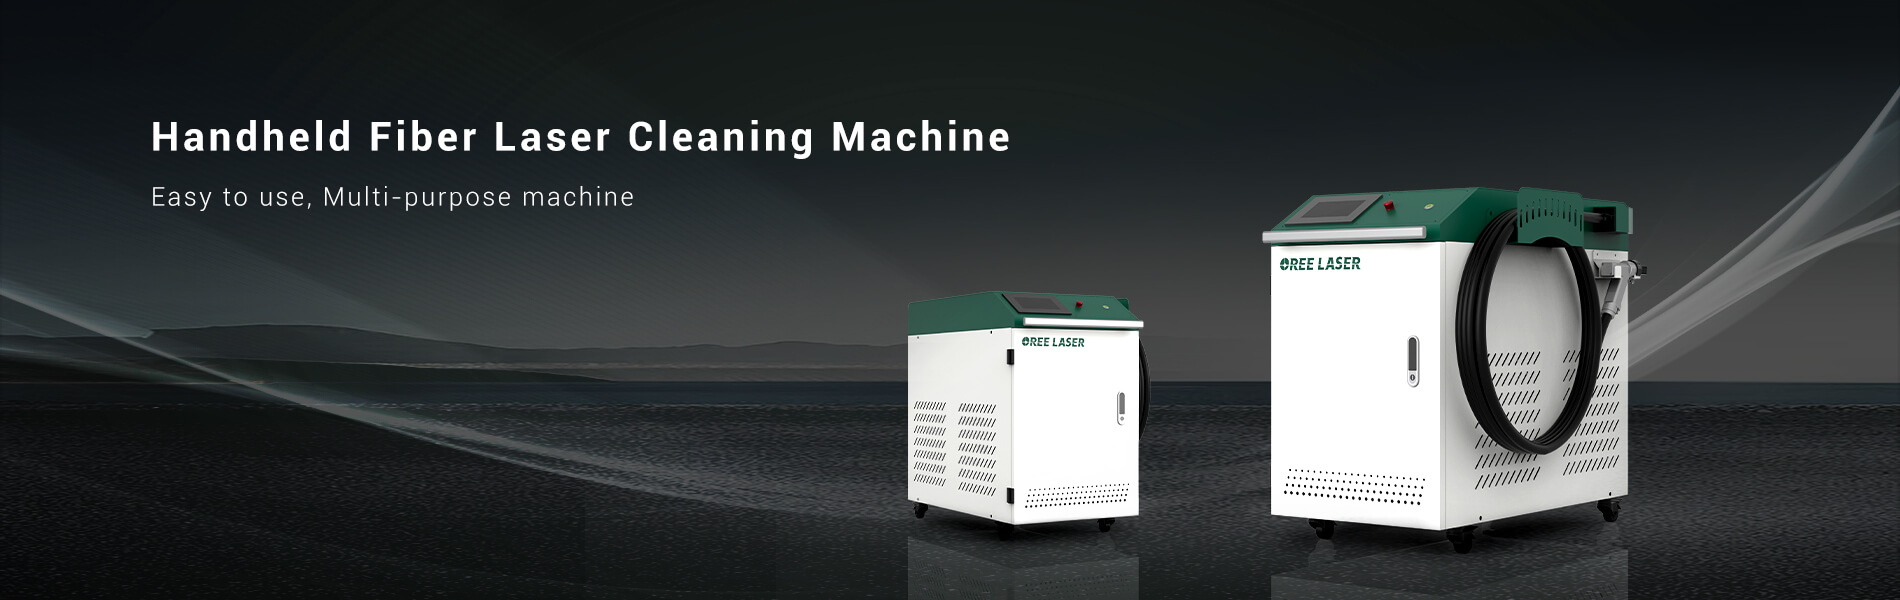 Precise cleaning · Stable and guaranteed